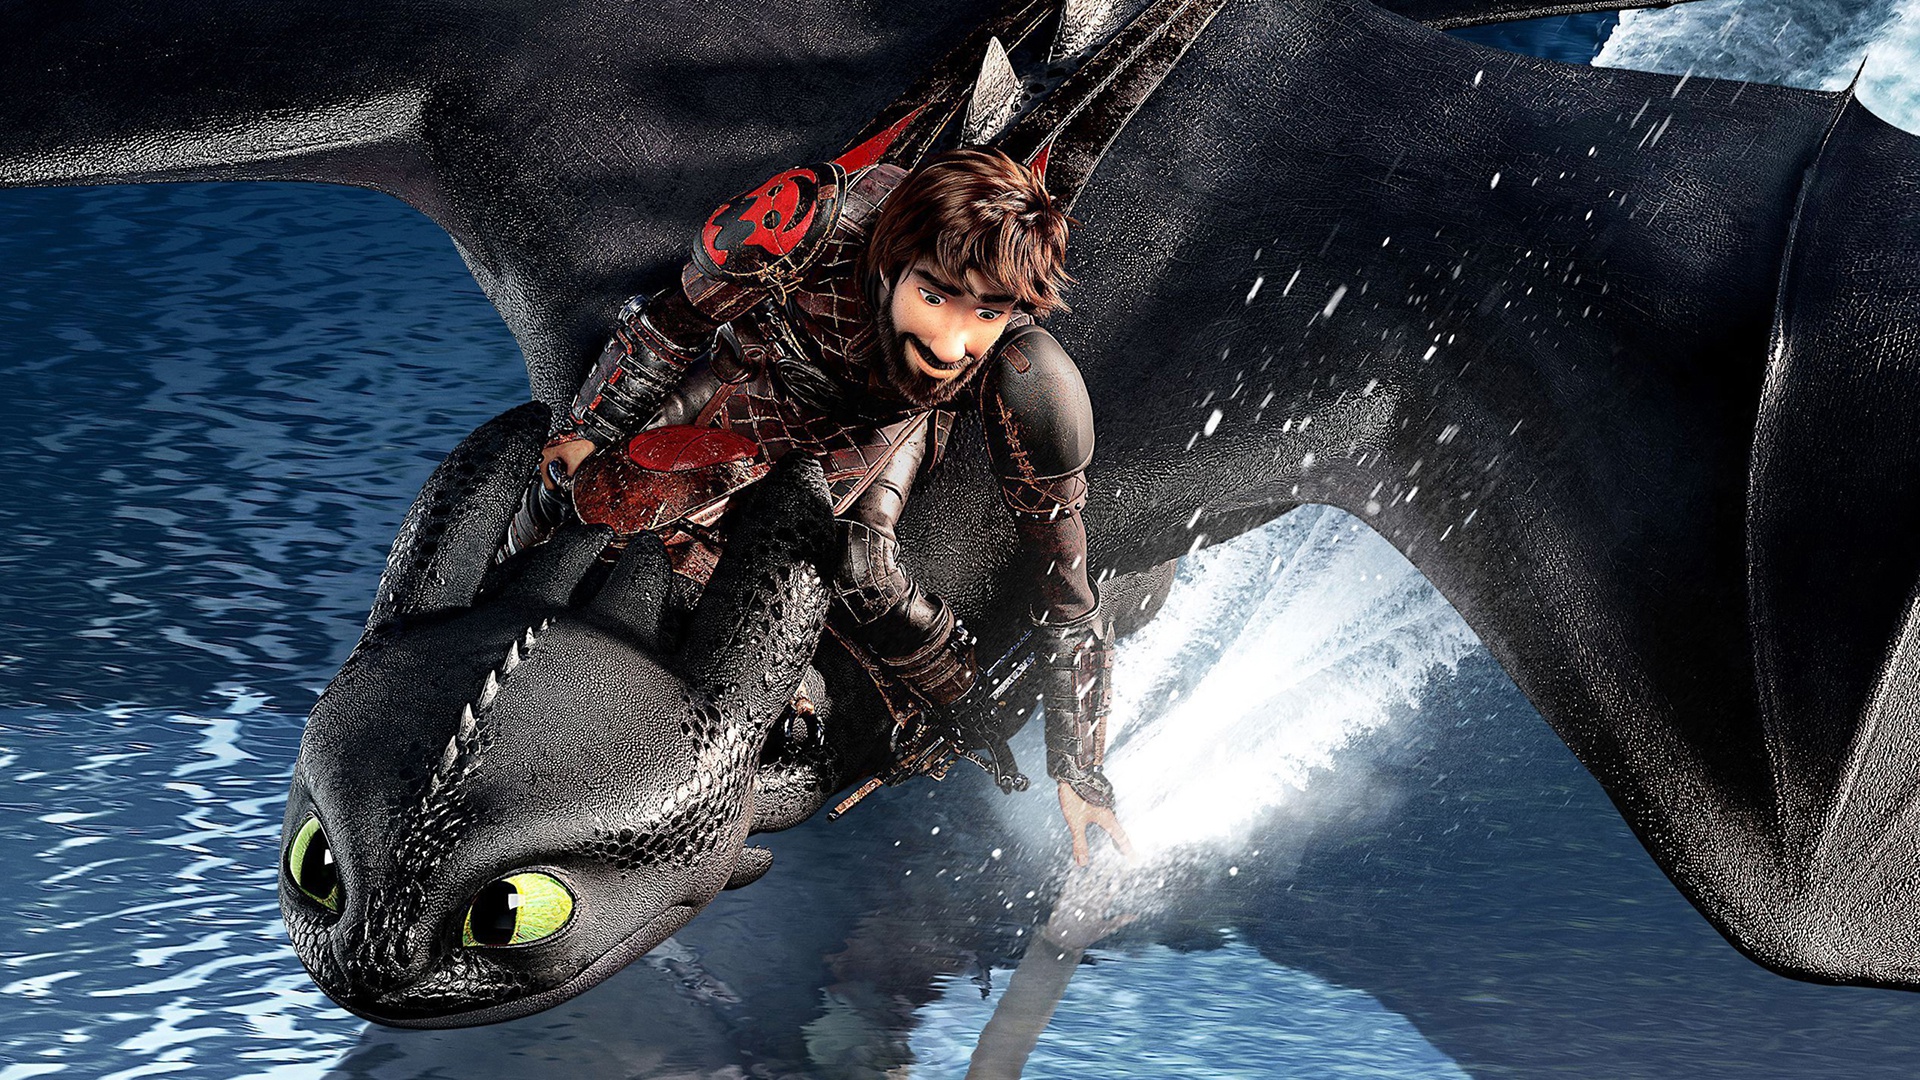 Wallpaper of Hiccup, How to Train Your Dragon Toothless